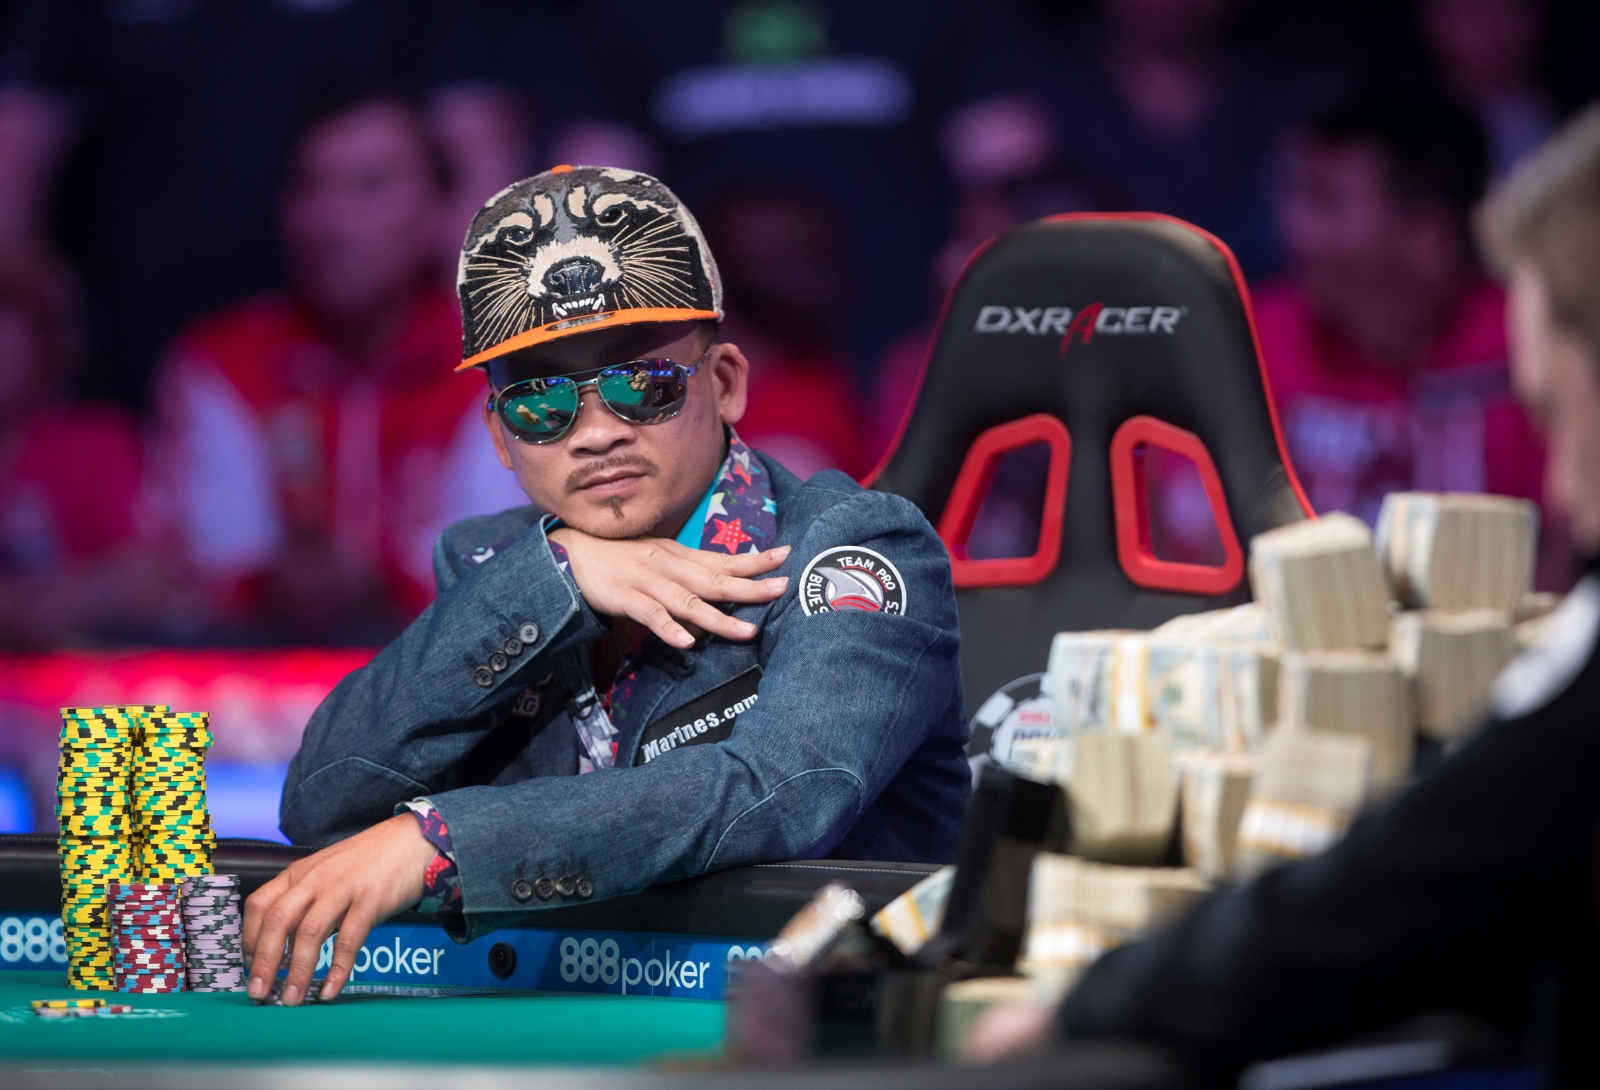 World Series of Poker Qui Nguyen wins 8m prize after longest head to